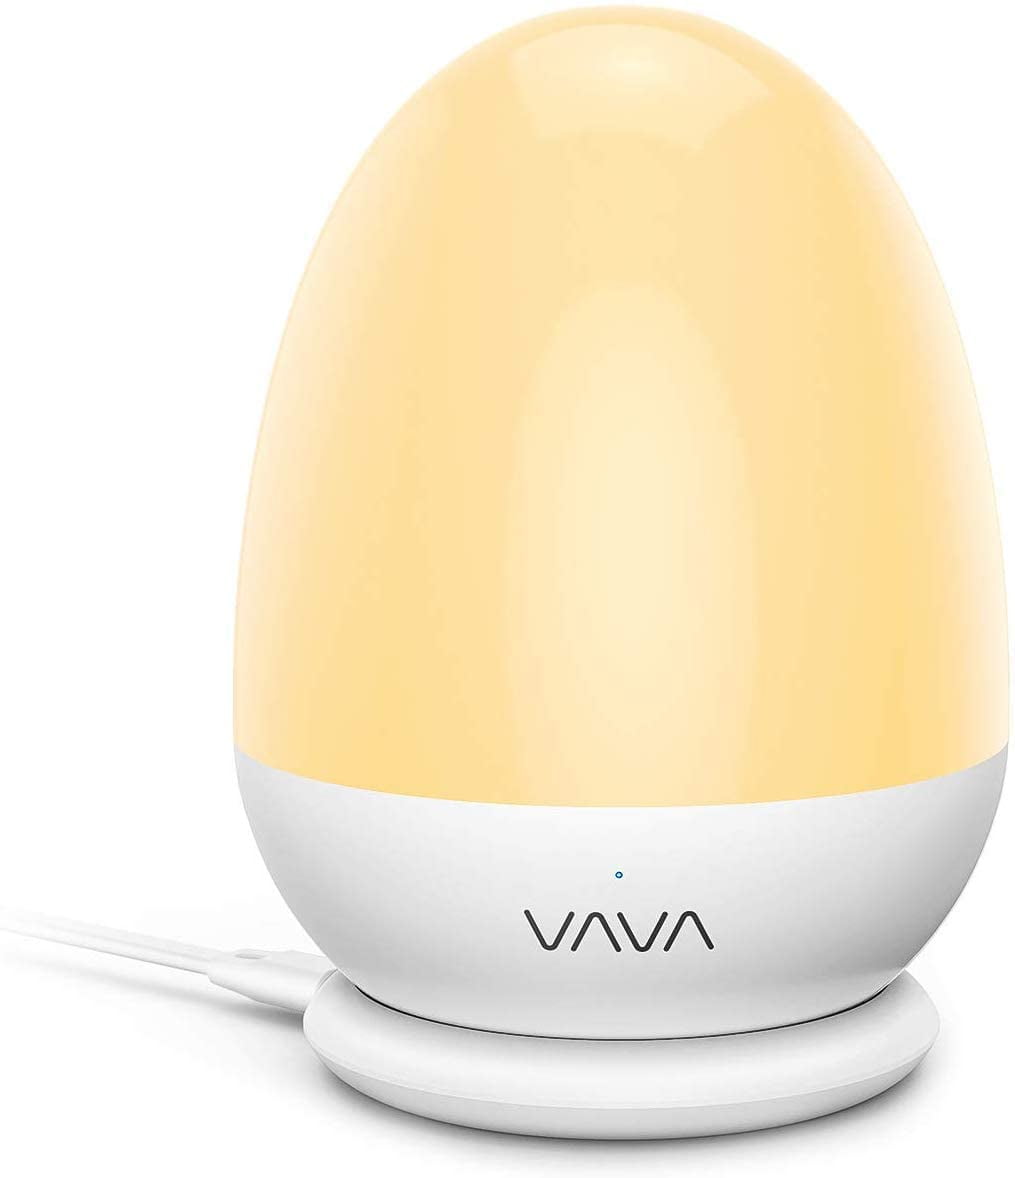 Adjustable Brightness & Color Night Light for Kids VAVA LED Bedside Lamp for Children 80 Hr Runtime Baby Nursery Lamp for Breastfeeding Safe ABS Eye Caring Touch Control White 